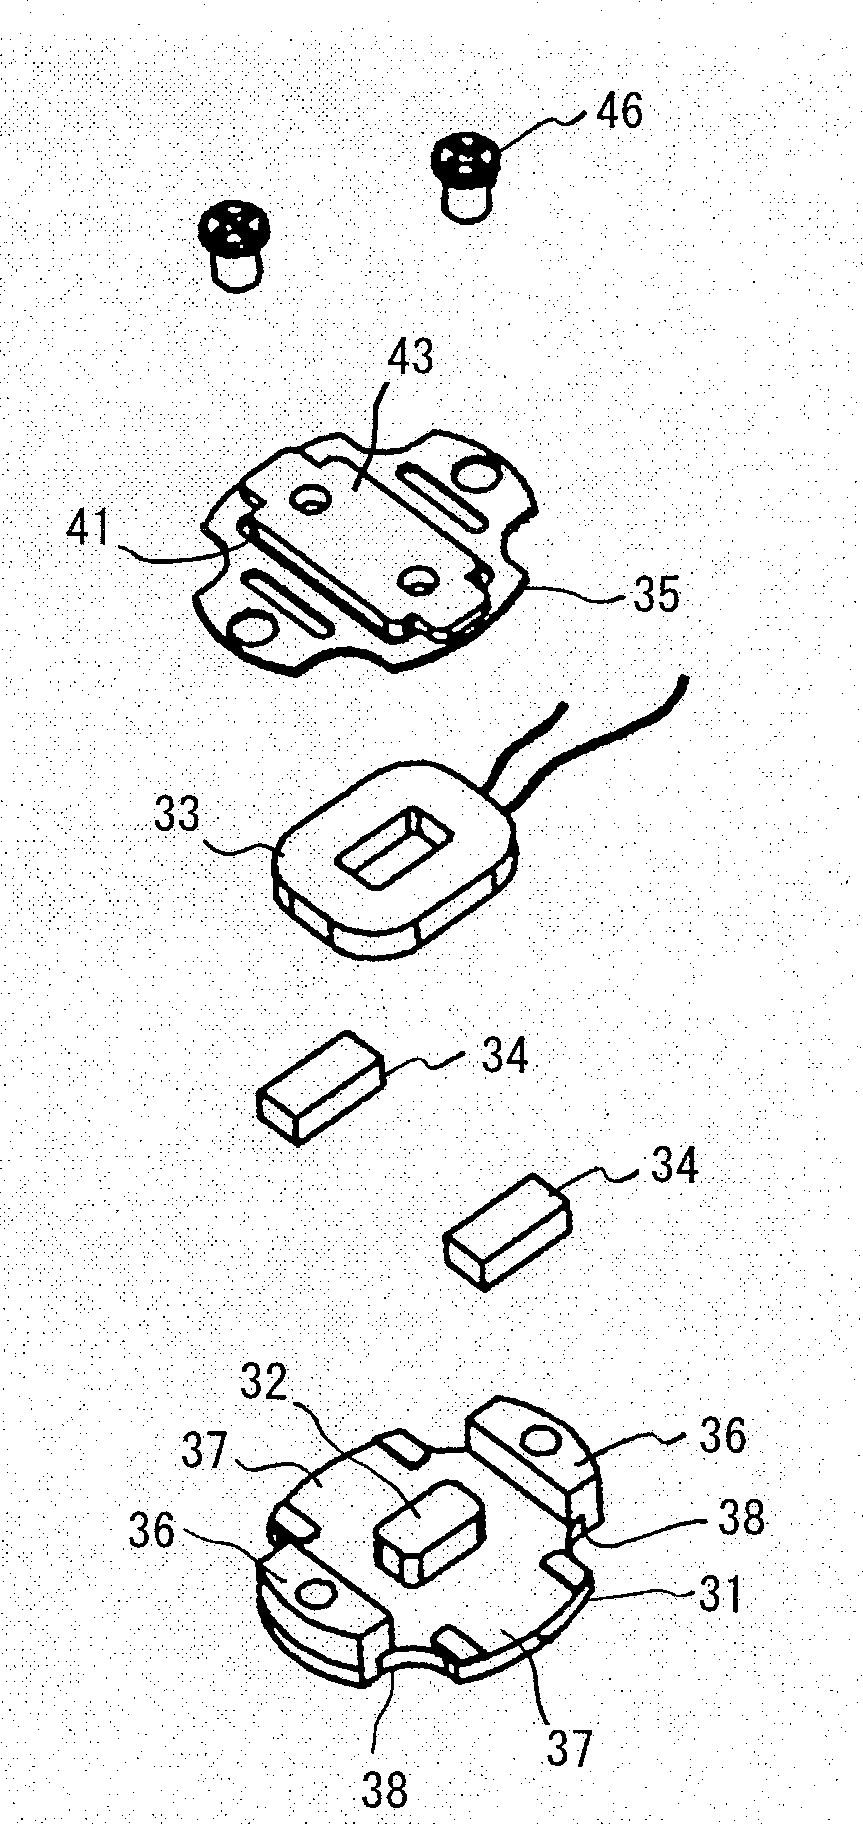 Bone-Conduction Device and Method of Manufacturing the Same